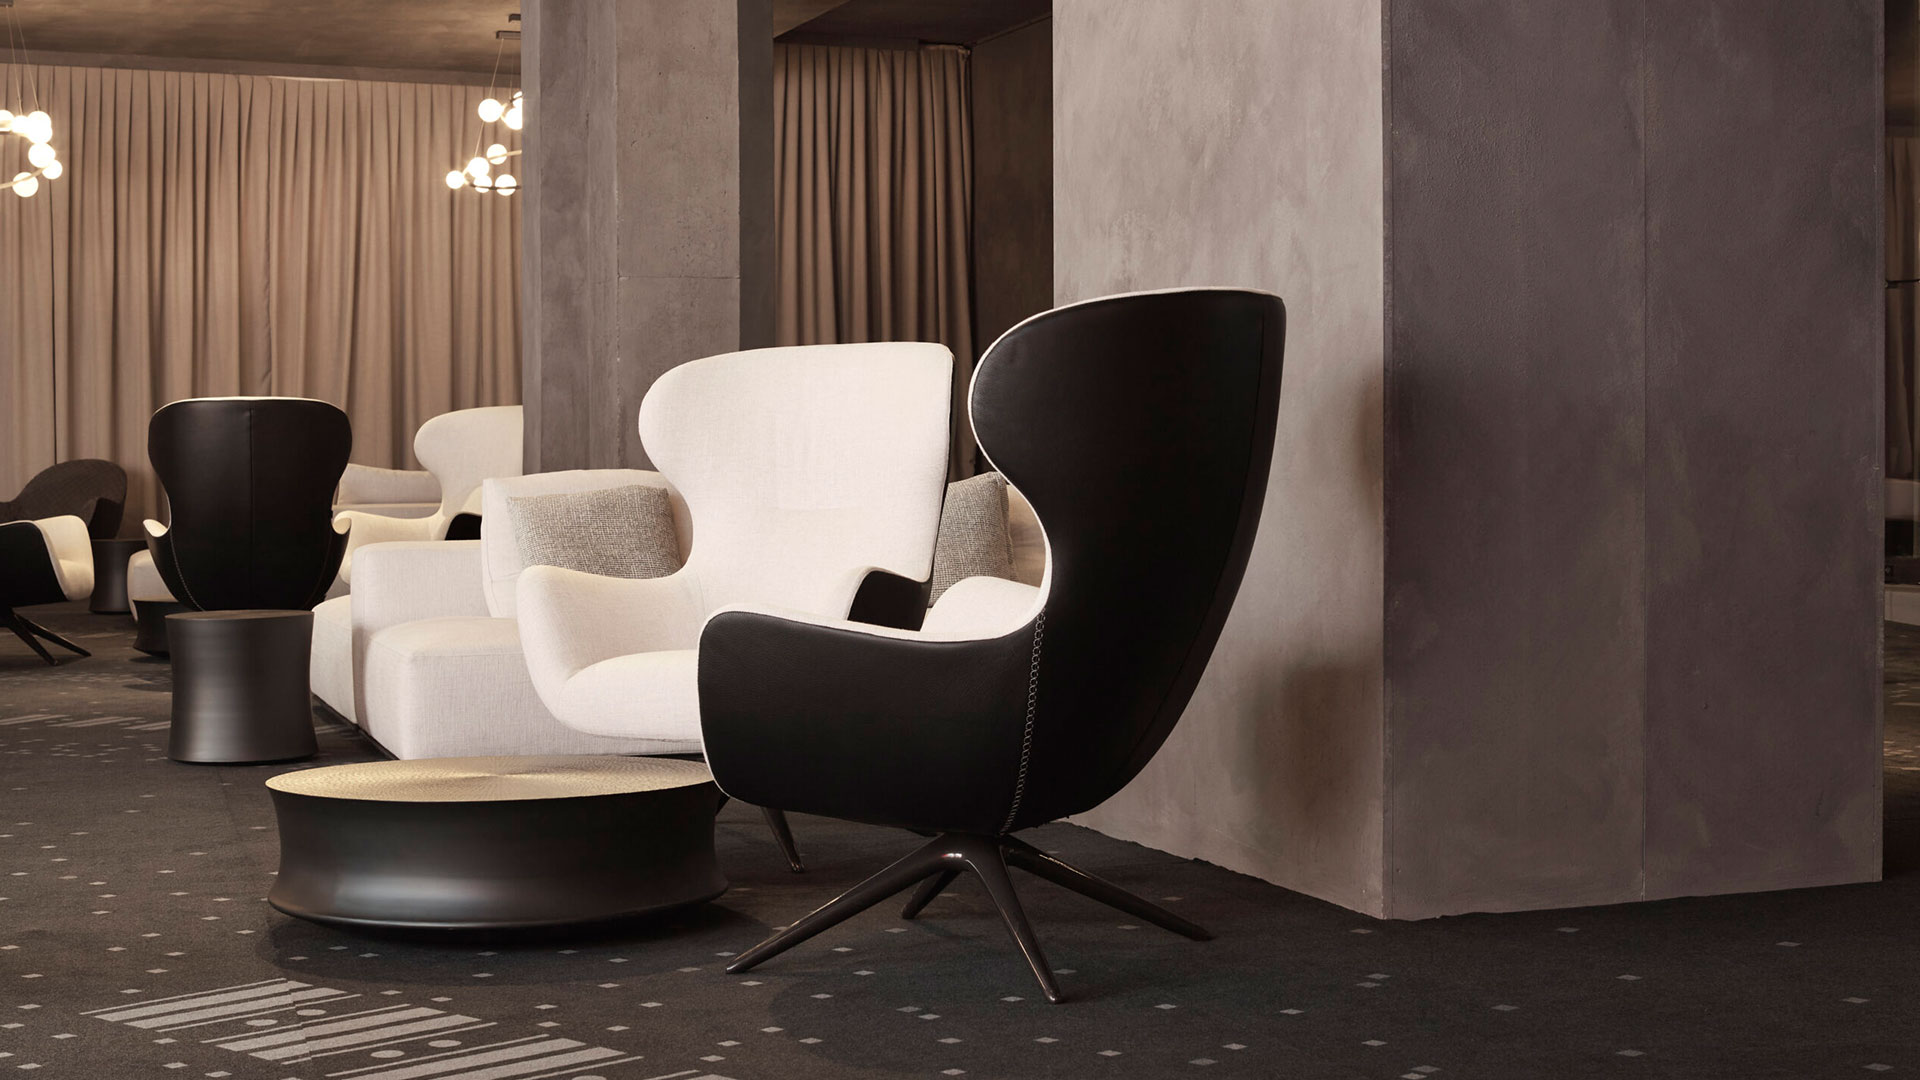 Milan Design Trends: A mesmerizing interior experience by Marcel Wanders